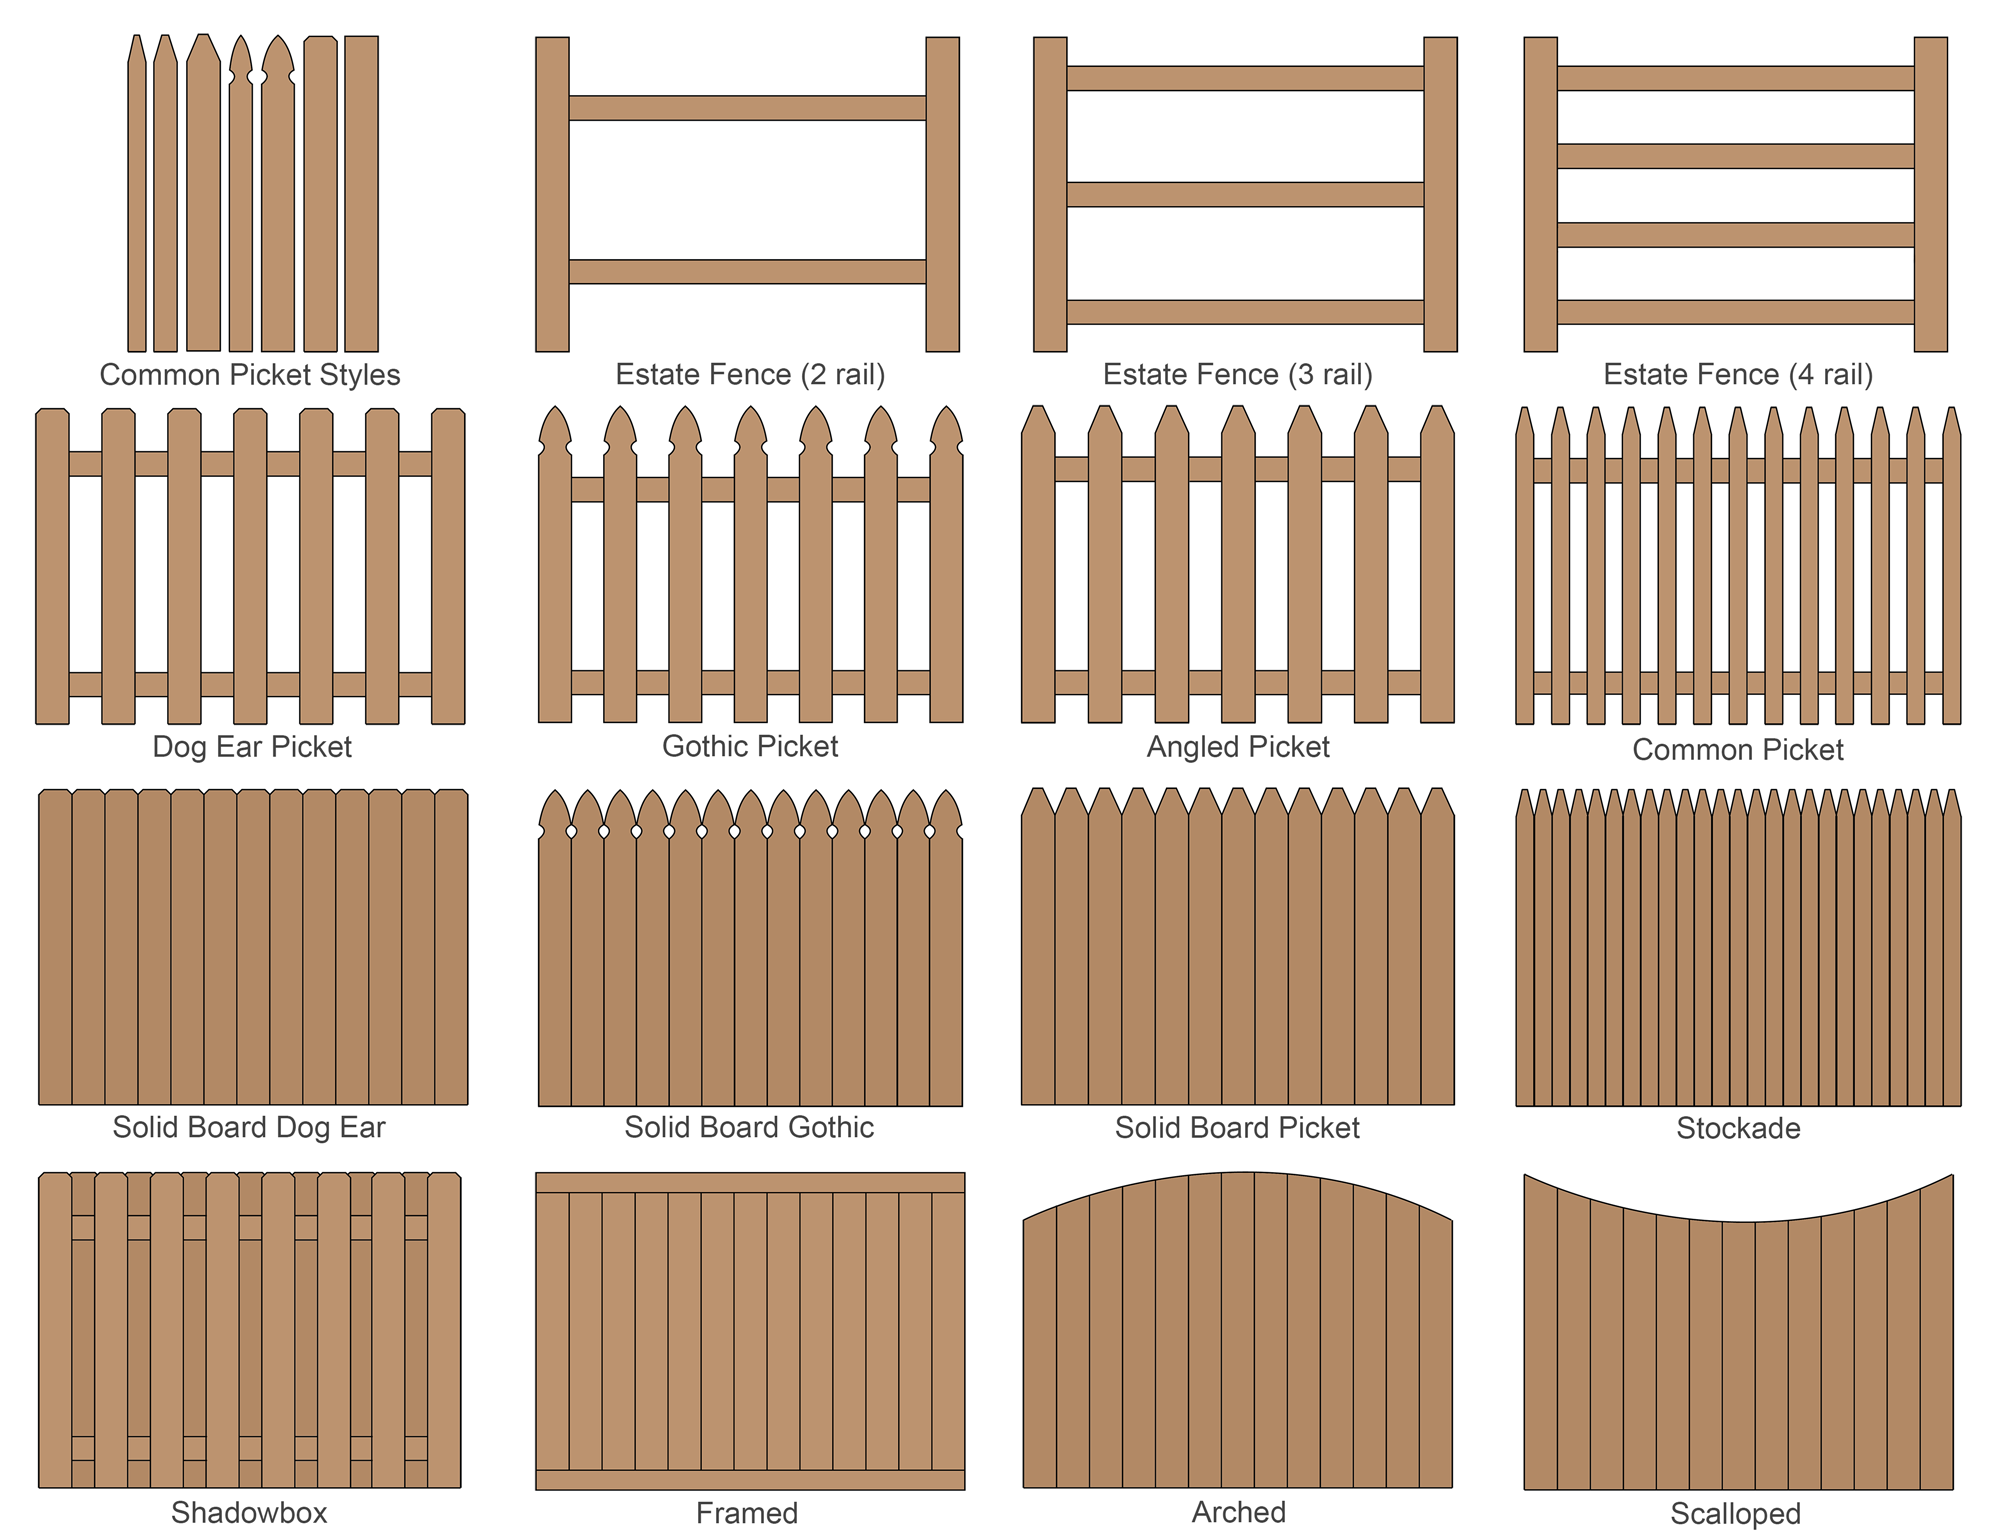 Illustration showing common fence styles including picket, privacy, and estate fence styles